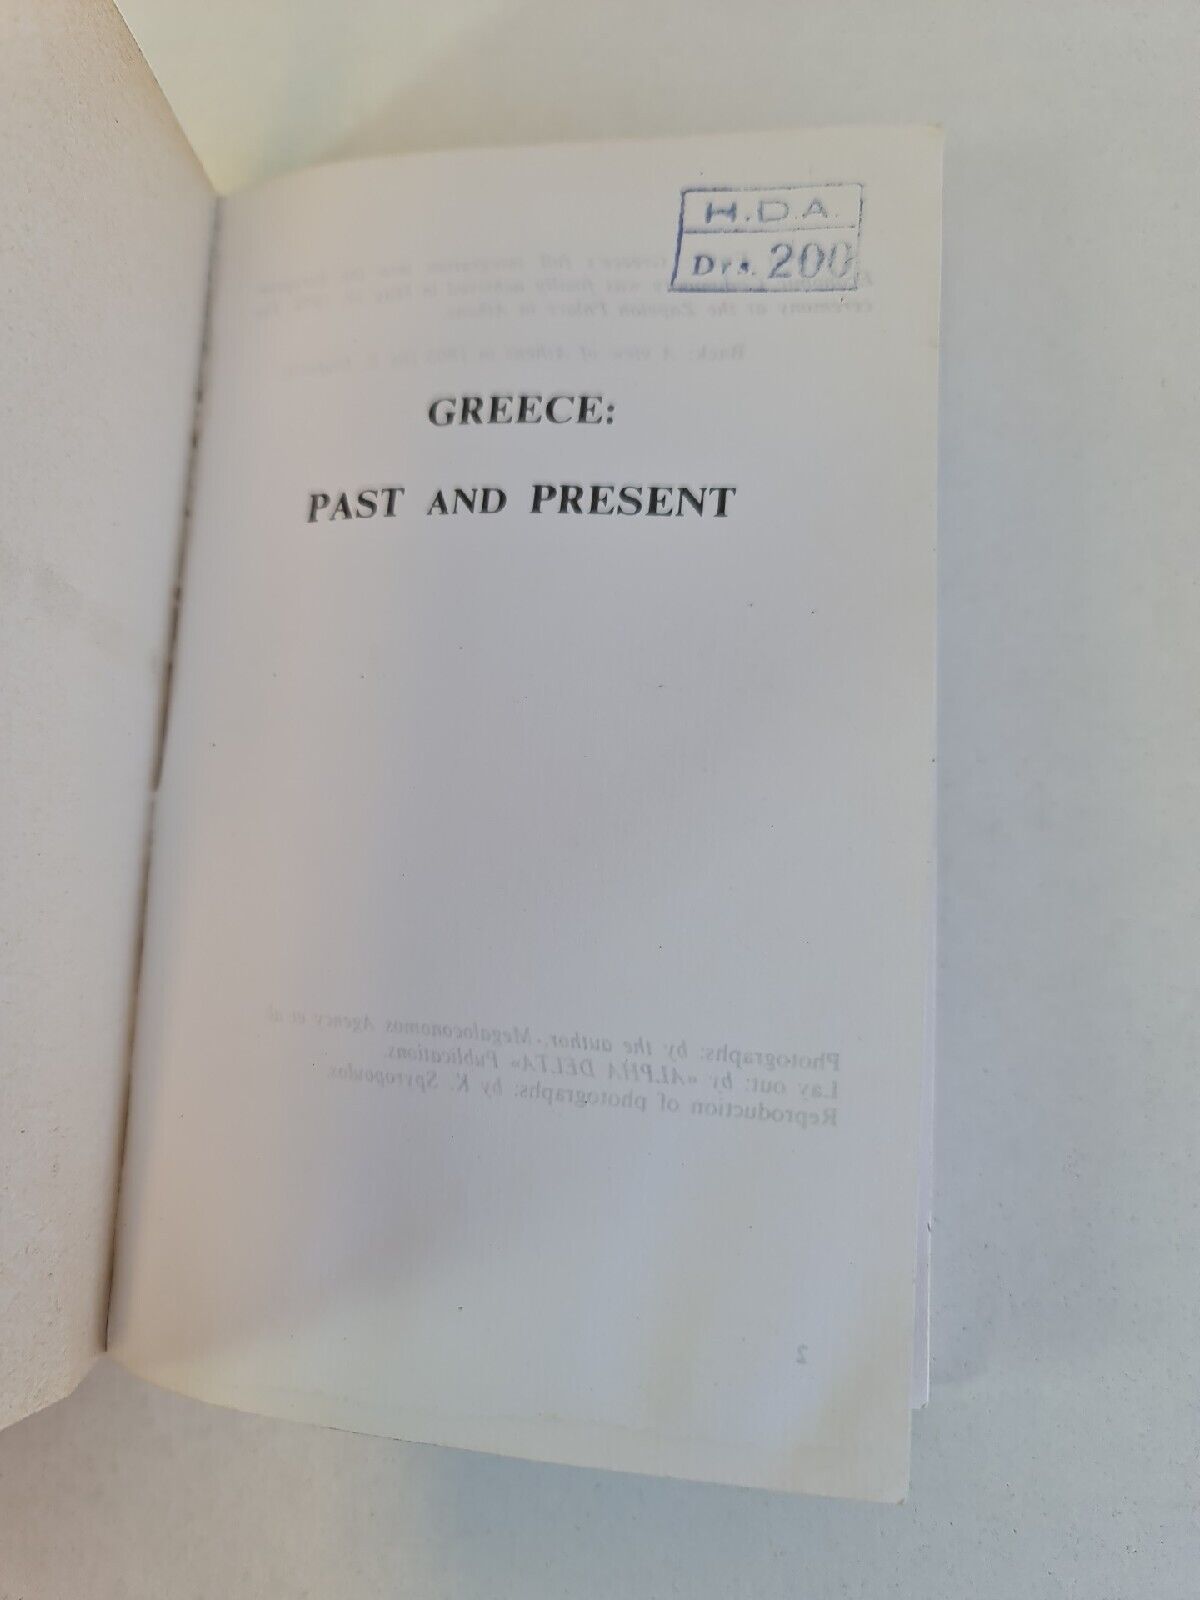 Greece: Past and Present by Delicostopoulos (1980)